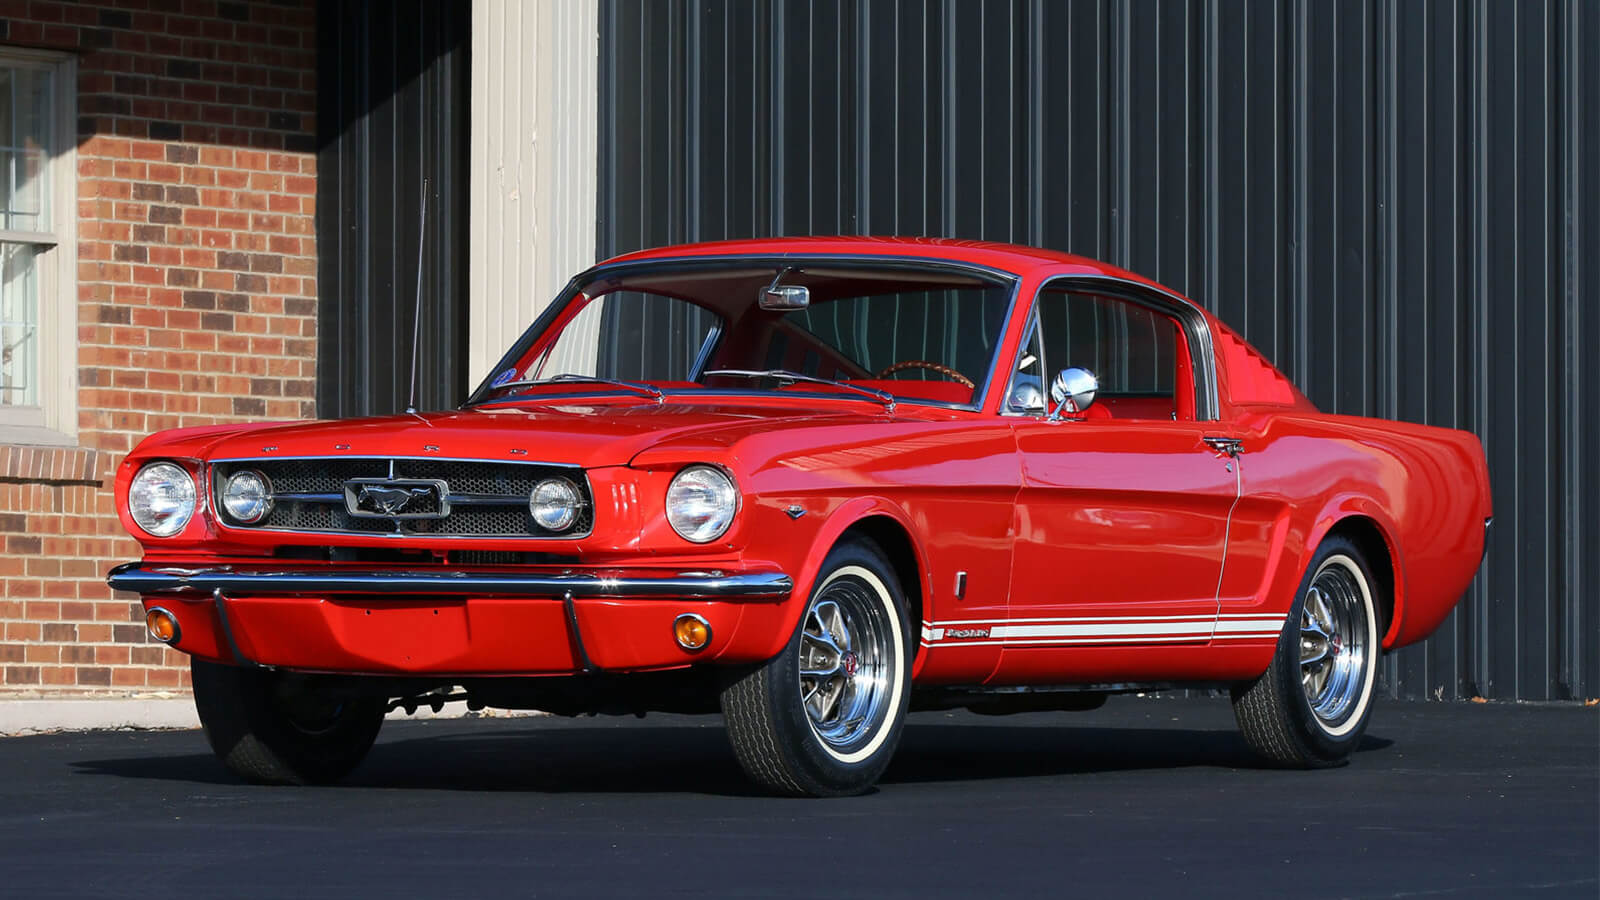  Ford Mustang 1960s Classic